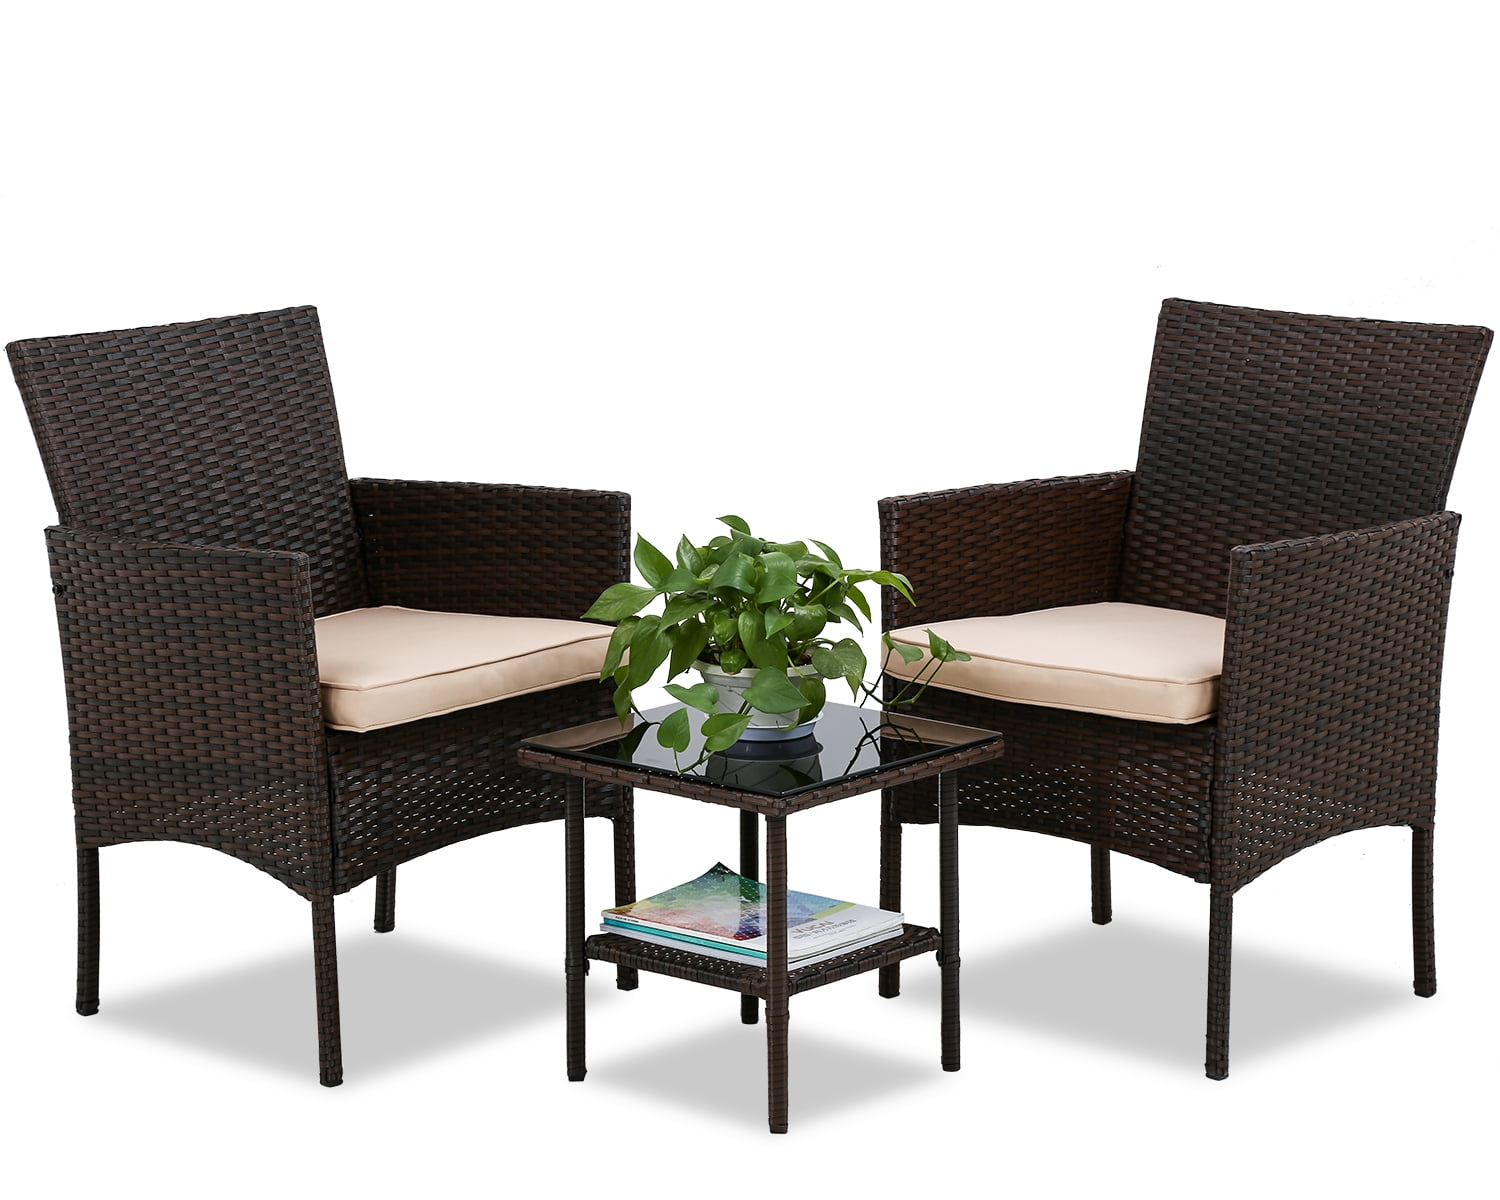 Bistro Set Outdoor Conversation Set PE Rattan Patio Dining Set for Porch Balcony Yard Space Saving Design Beige Furnimy 3 Pieces Outdoor Furniture Wicker Patio Set No Assembly Required 